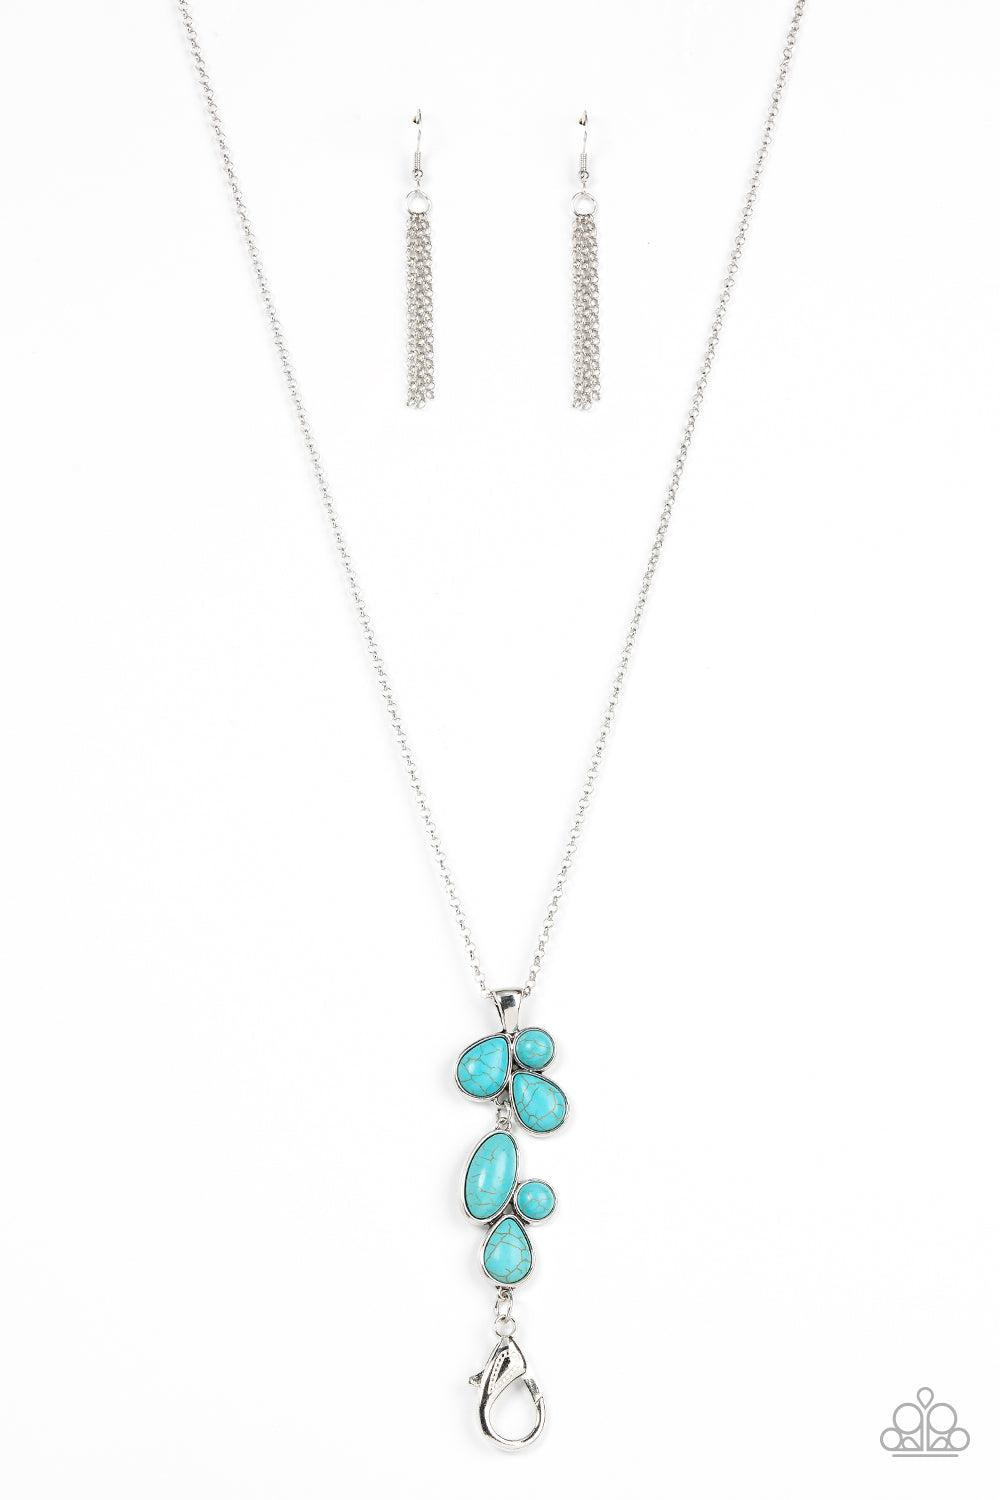 Wild Bunch Flair Turquoise Blue Stone Lanyard Necklace - Paparazzi Accessories- lightbox - CarasShop.com - $5 Jewelry by Cara Jewels